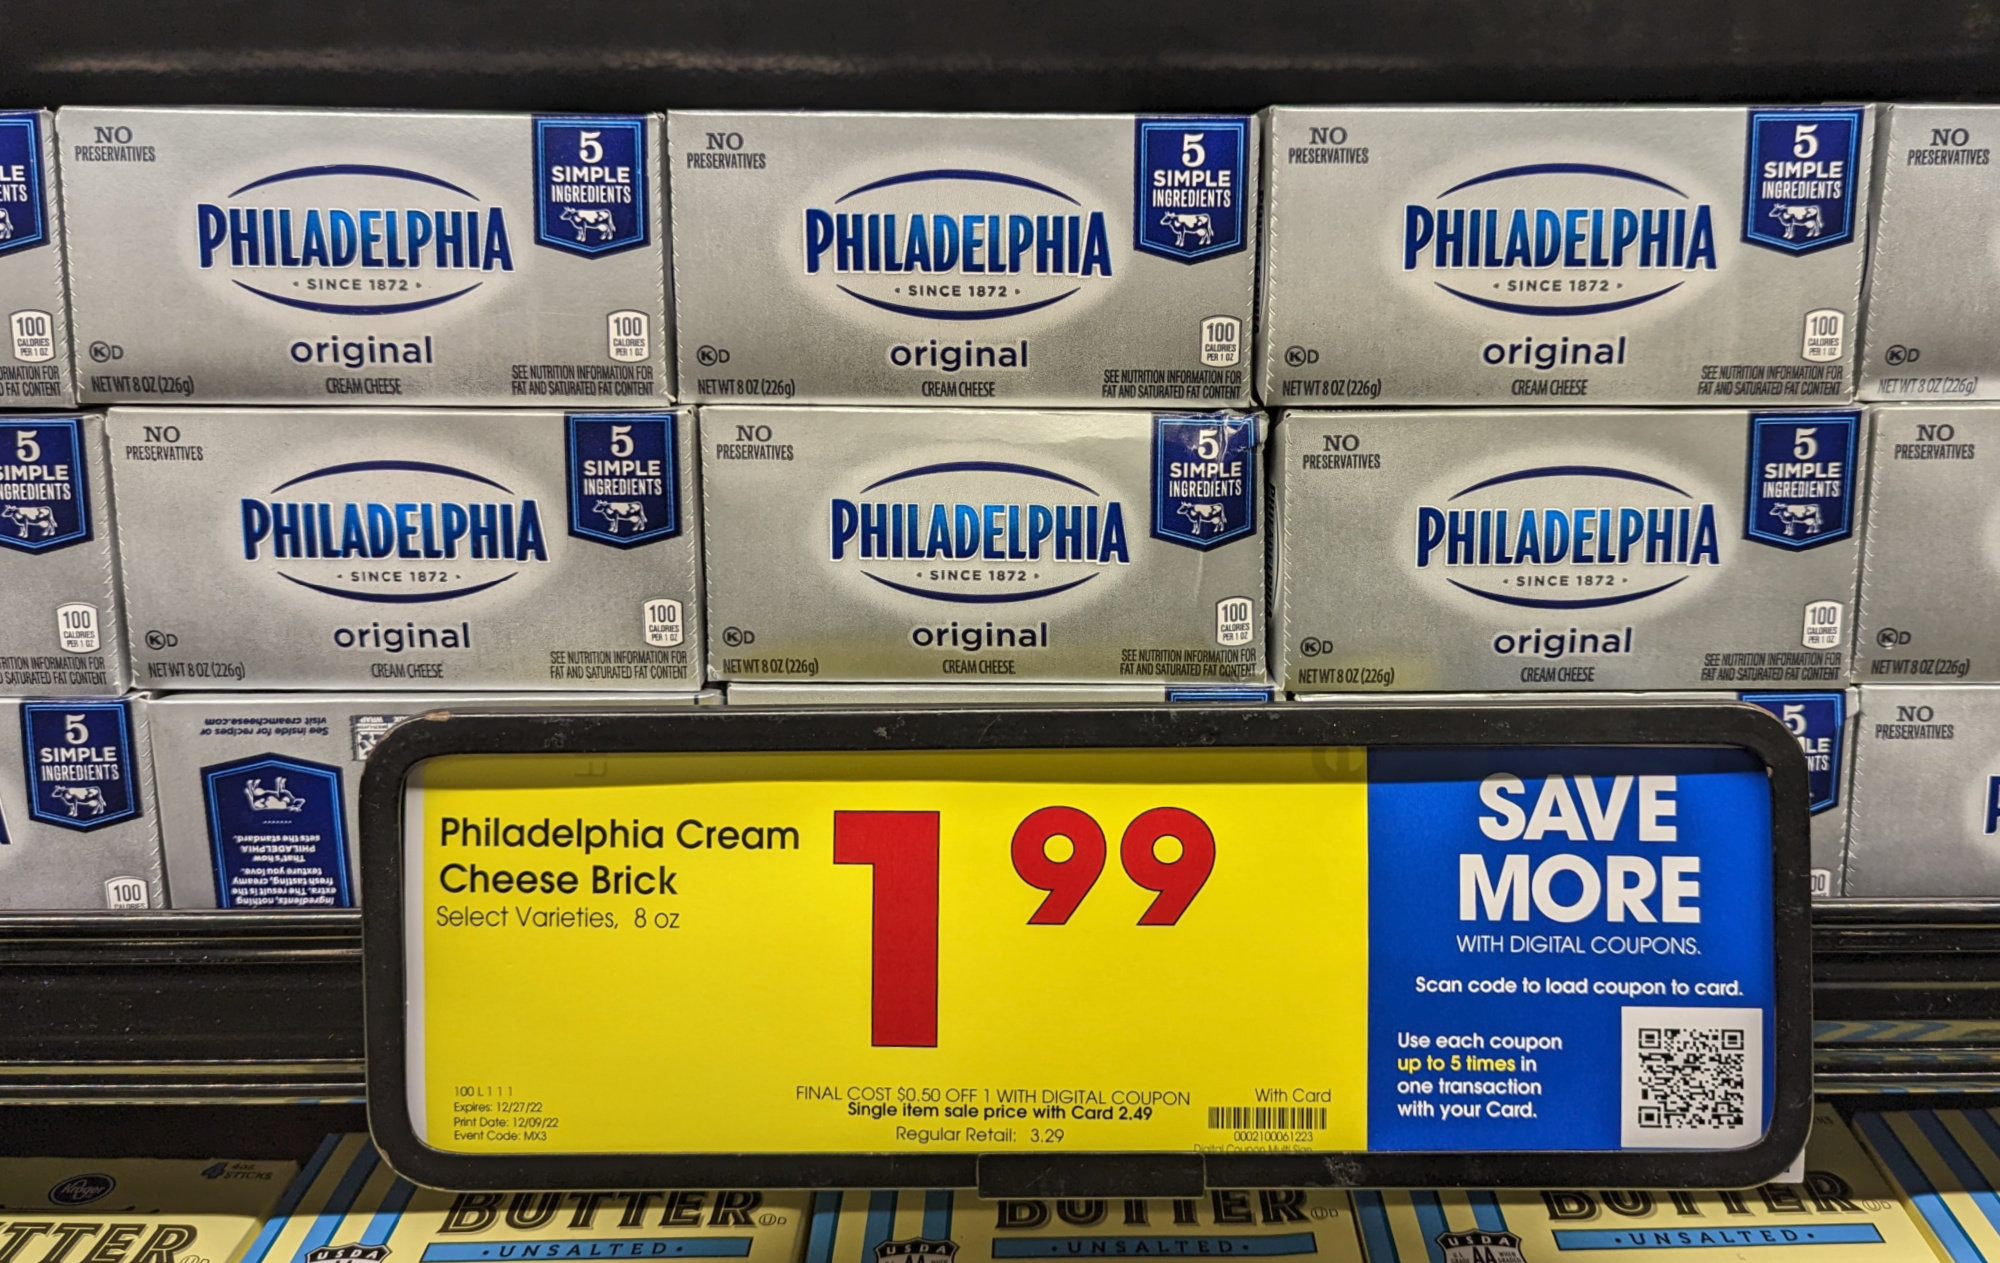 Platinum Cheese of the Month - 3 Month/Pay Full (2 pound), 1 - Kroger